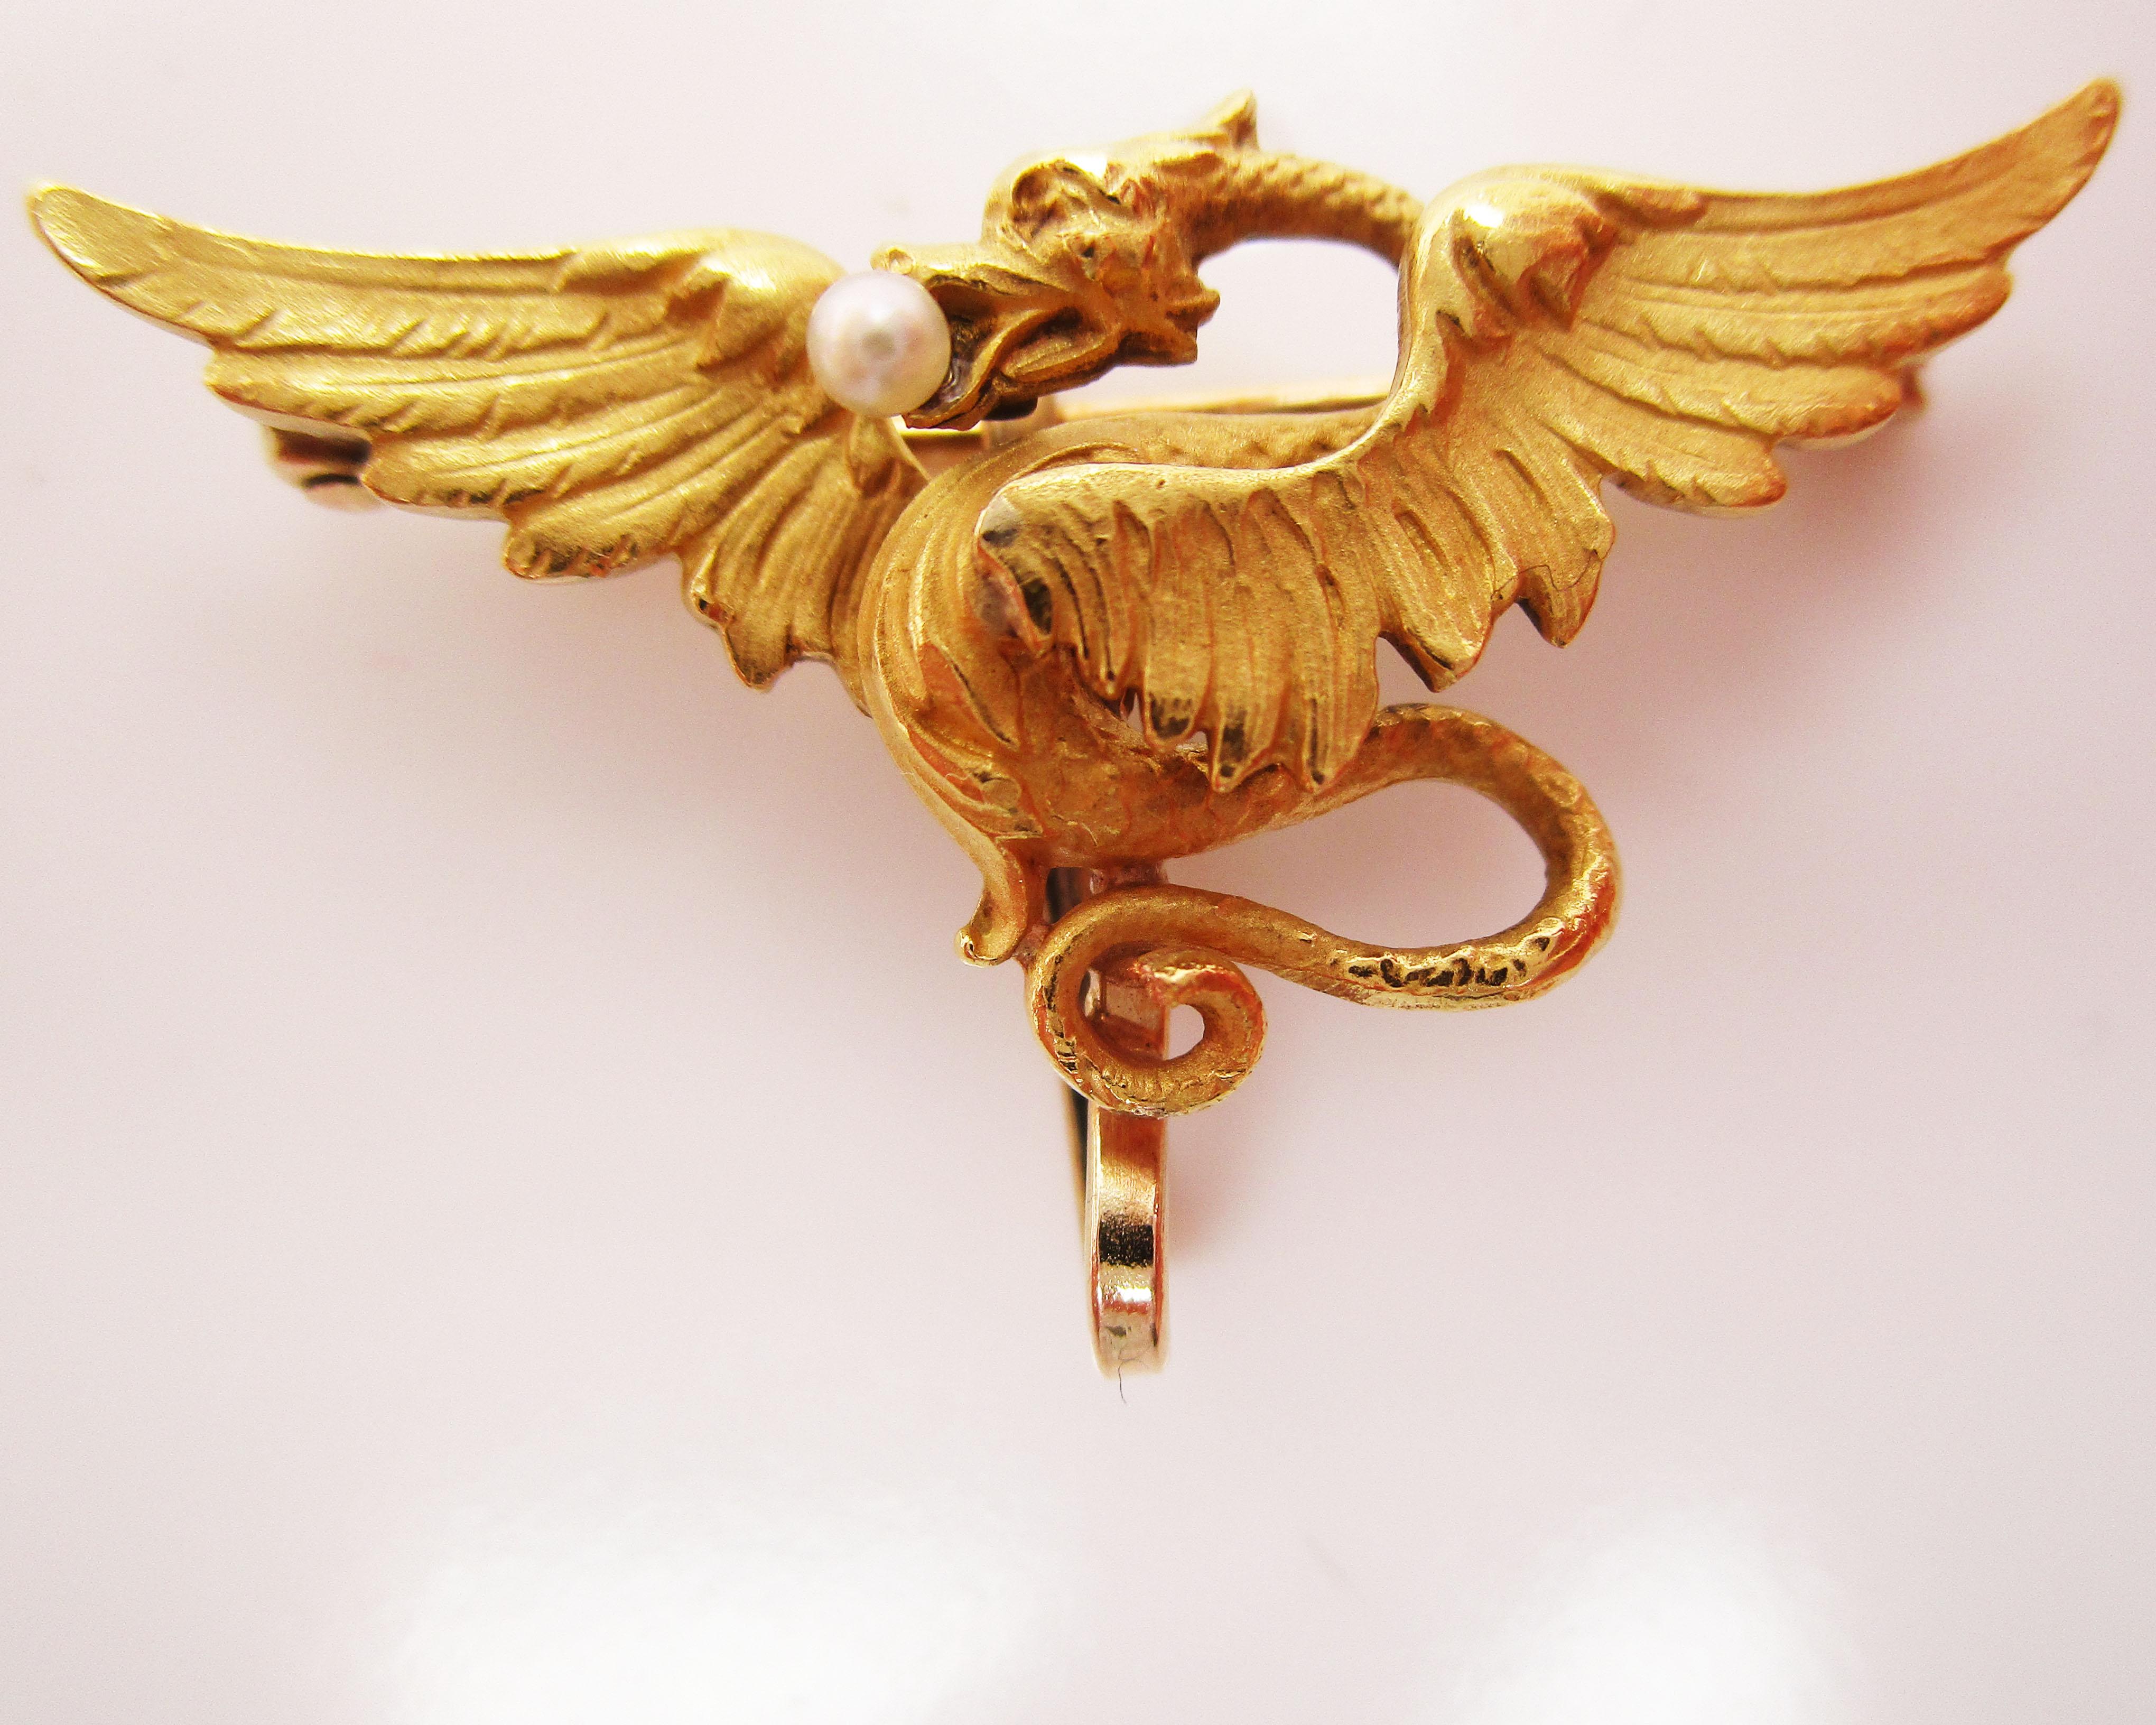 This is a magnificent Victorian watch holder pin by Krementz featuring a fantastic dragon design and a pearl accent! The design of the pin is reminiscent of a pilot’s wings pin, but featuring a majestic dragon with wings spread and a dramatically